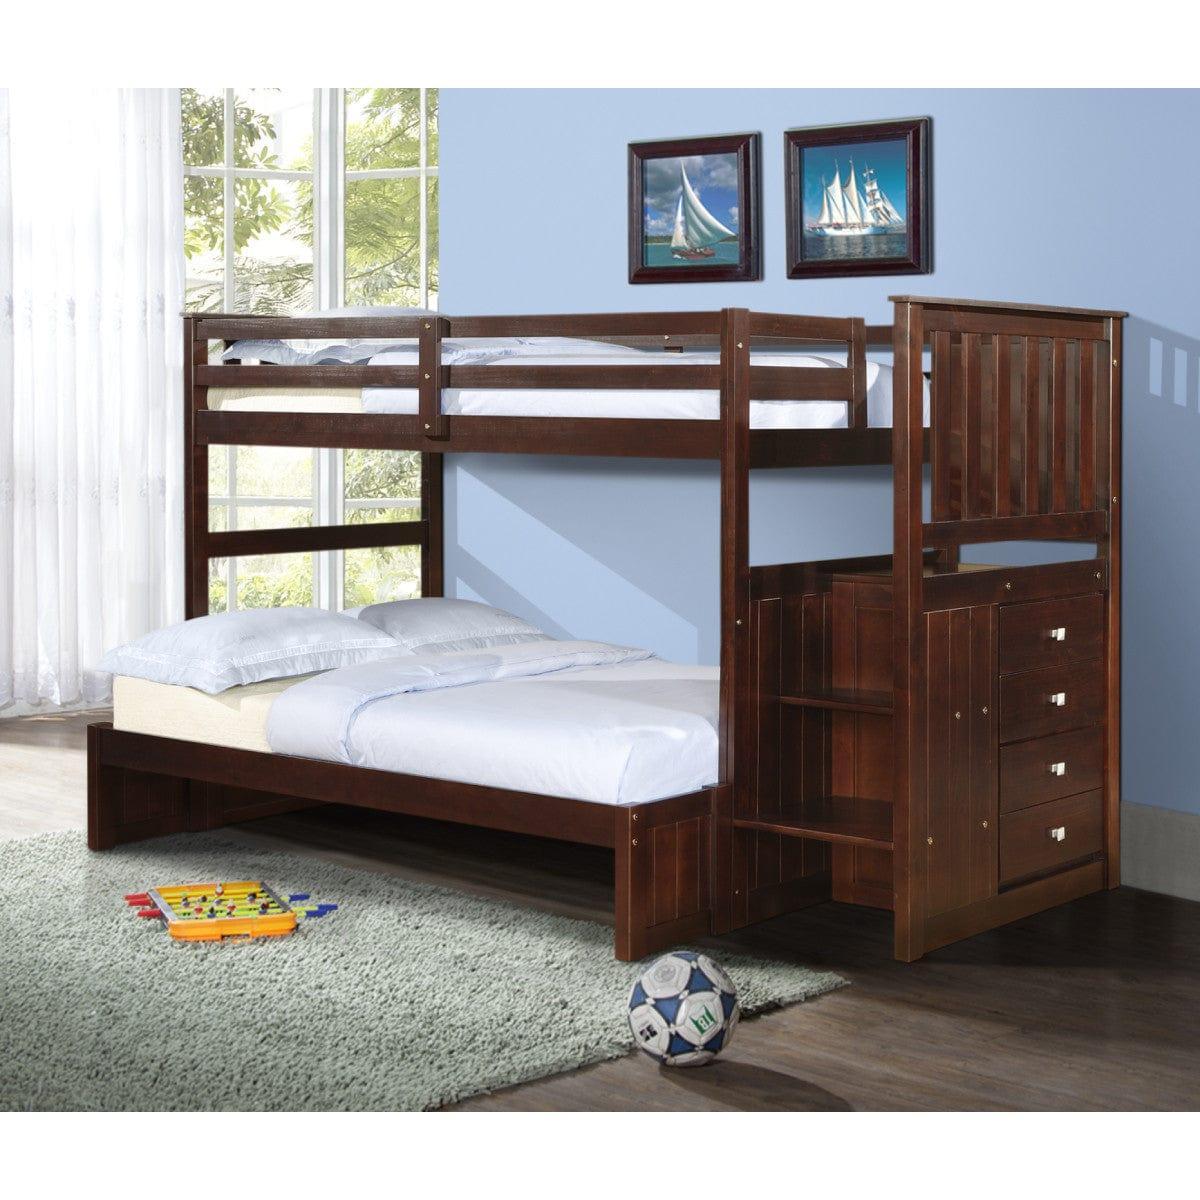 Donco Twin/Full Mission Stairway Bunk Bed With Ext Kit Cappuccino Finish - Bedroom Depot USA